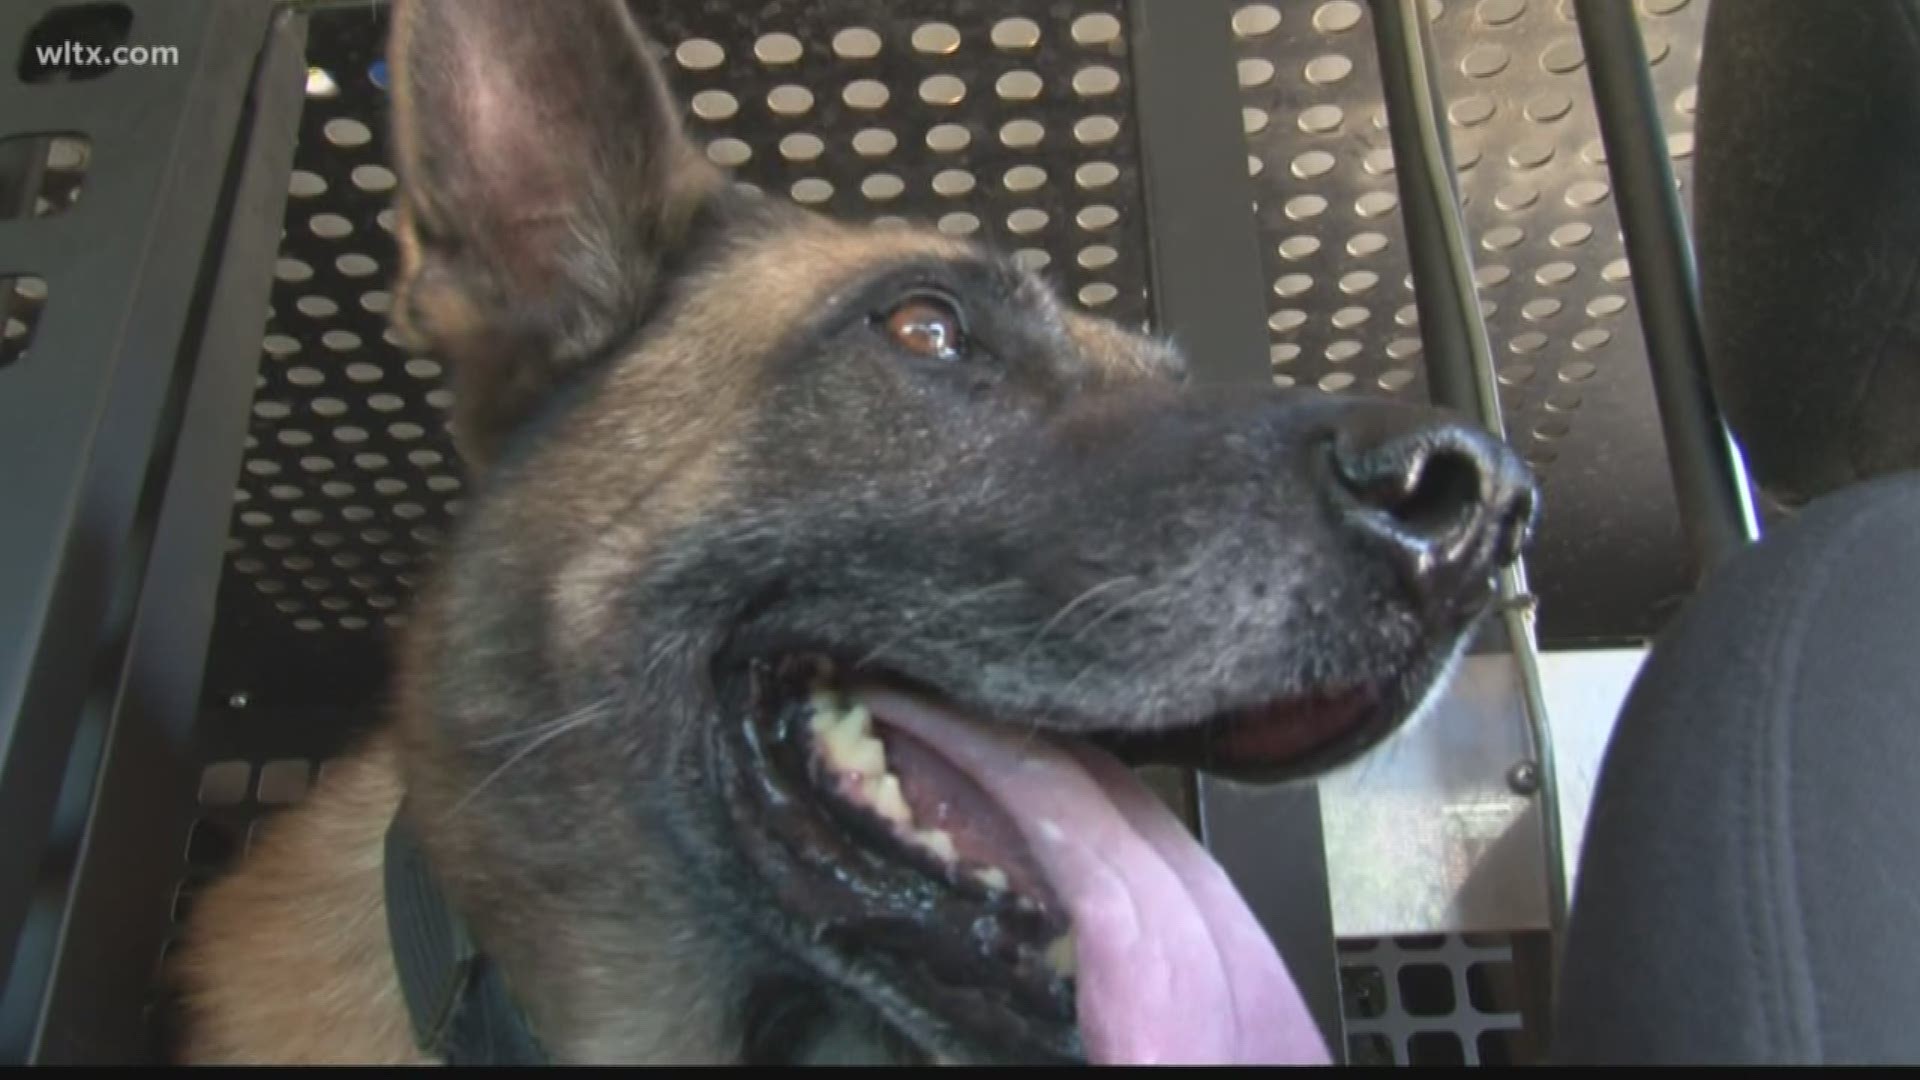 Deputy Tasers own K-9 after it bites cow during burglary call 